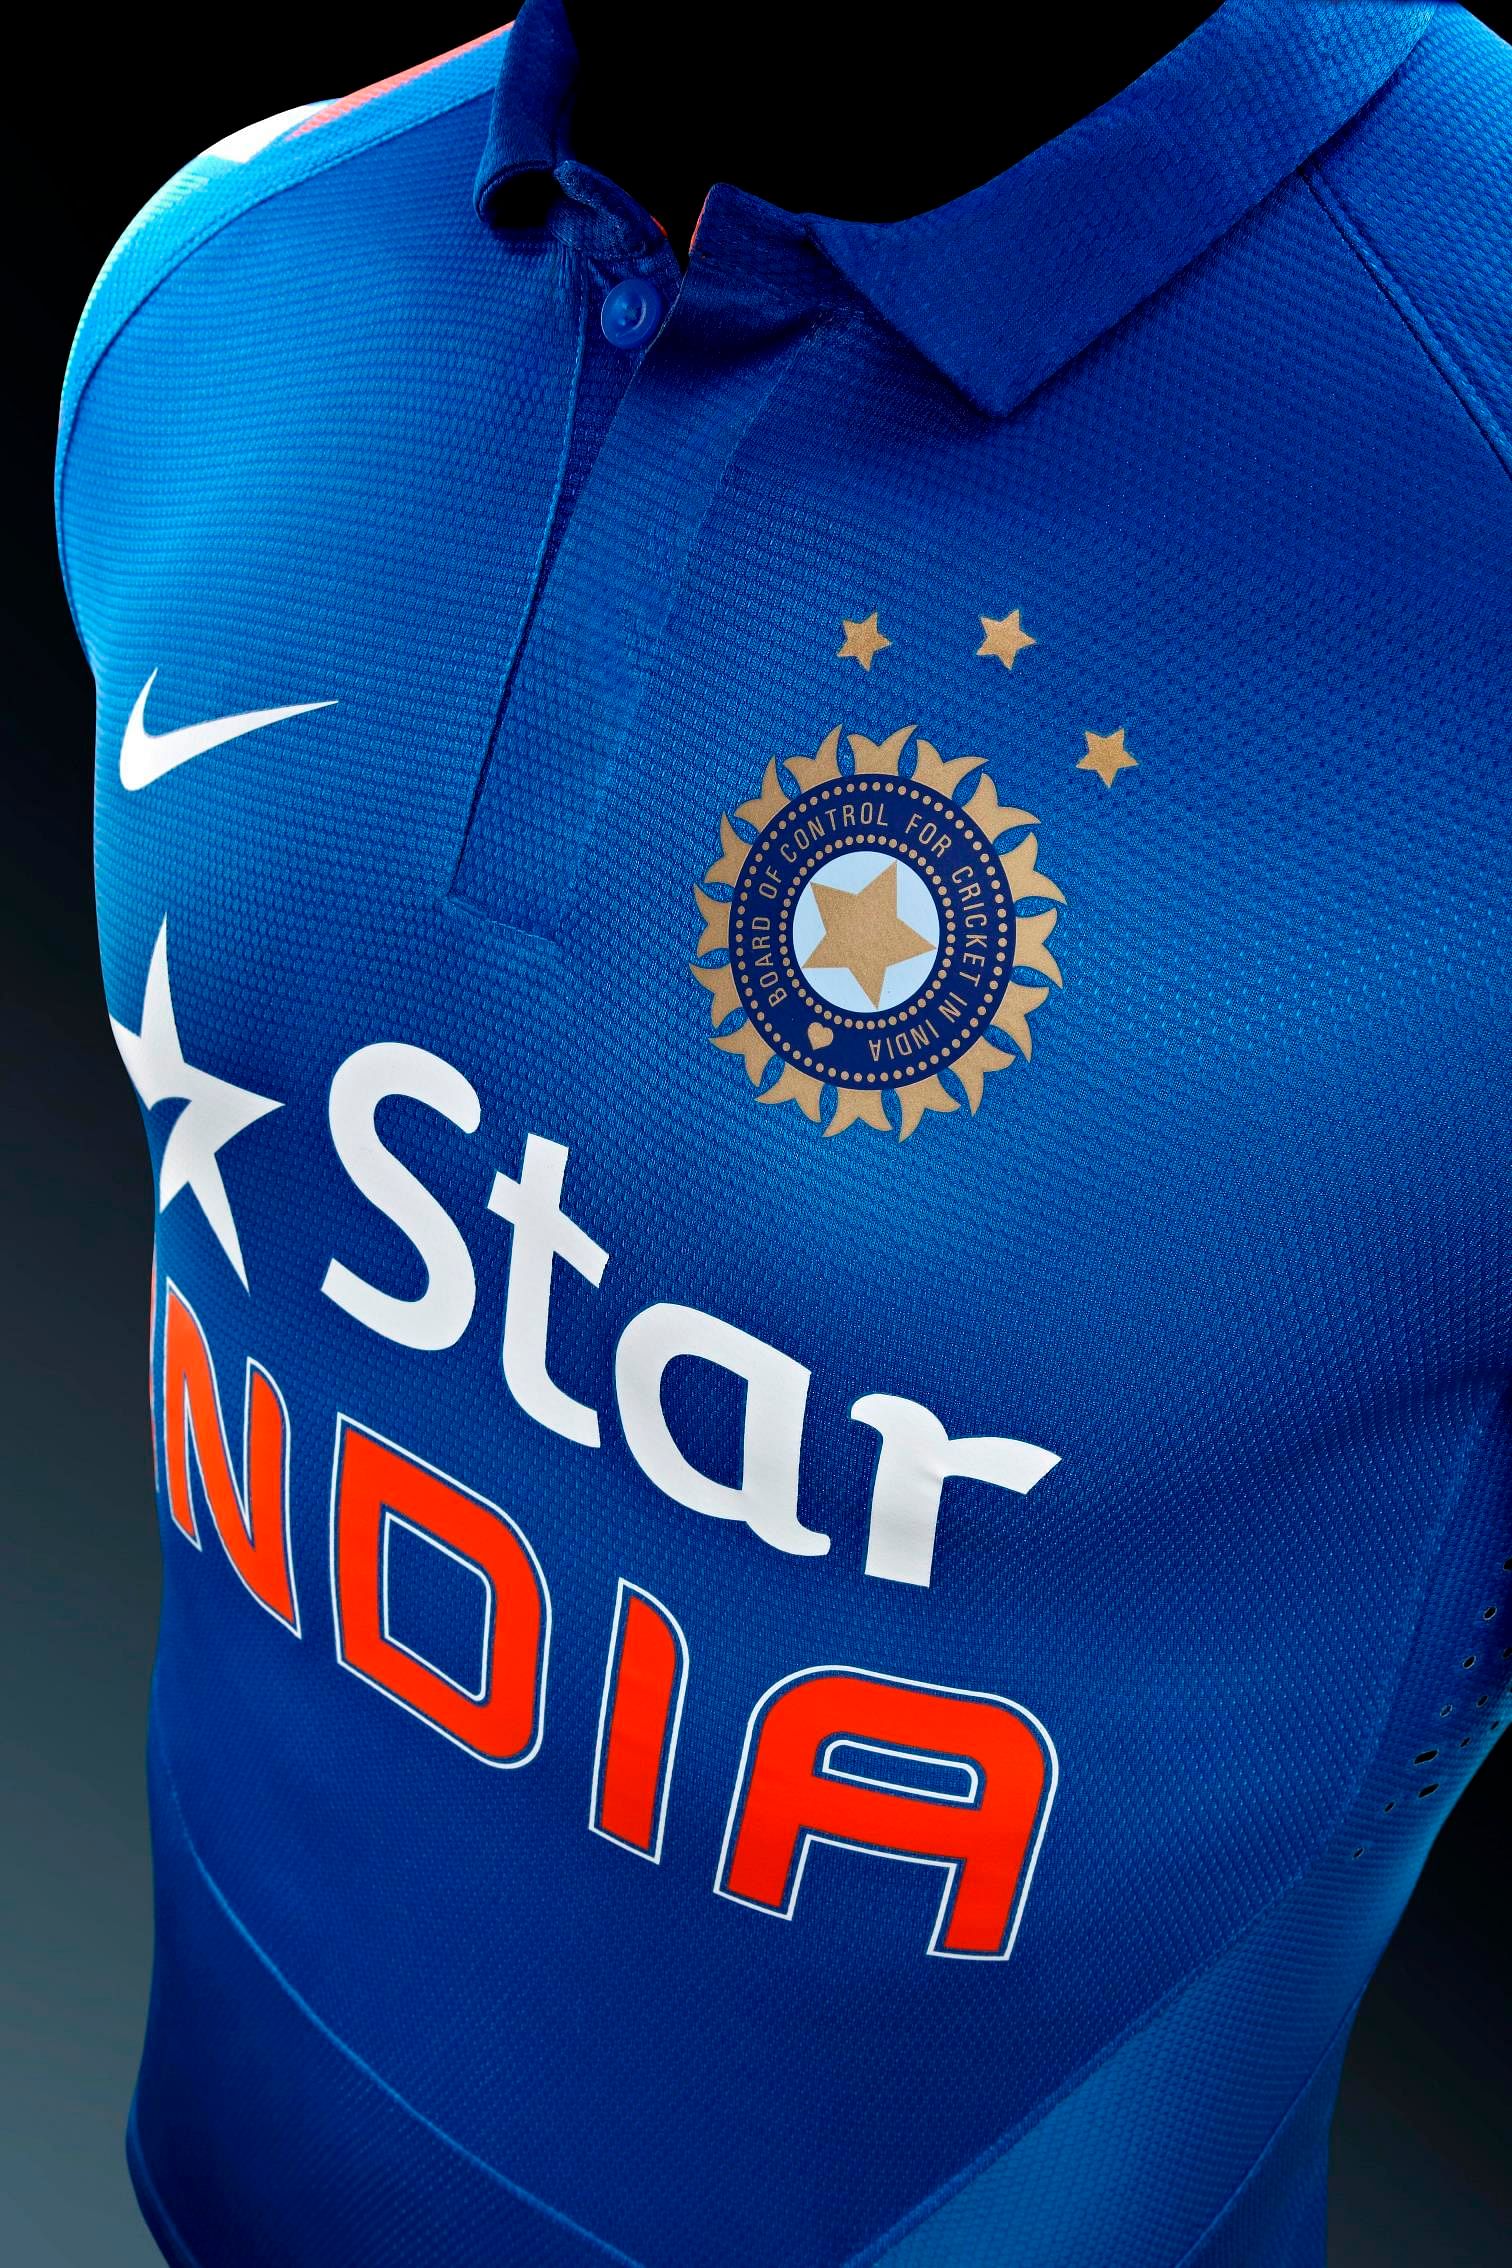 nike official team india jersey